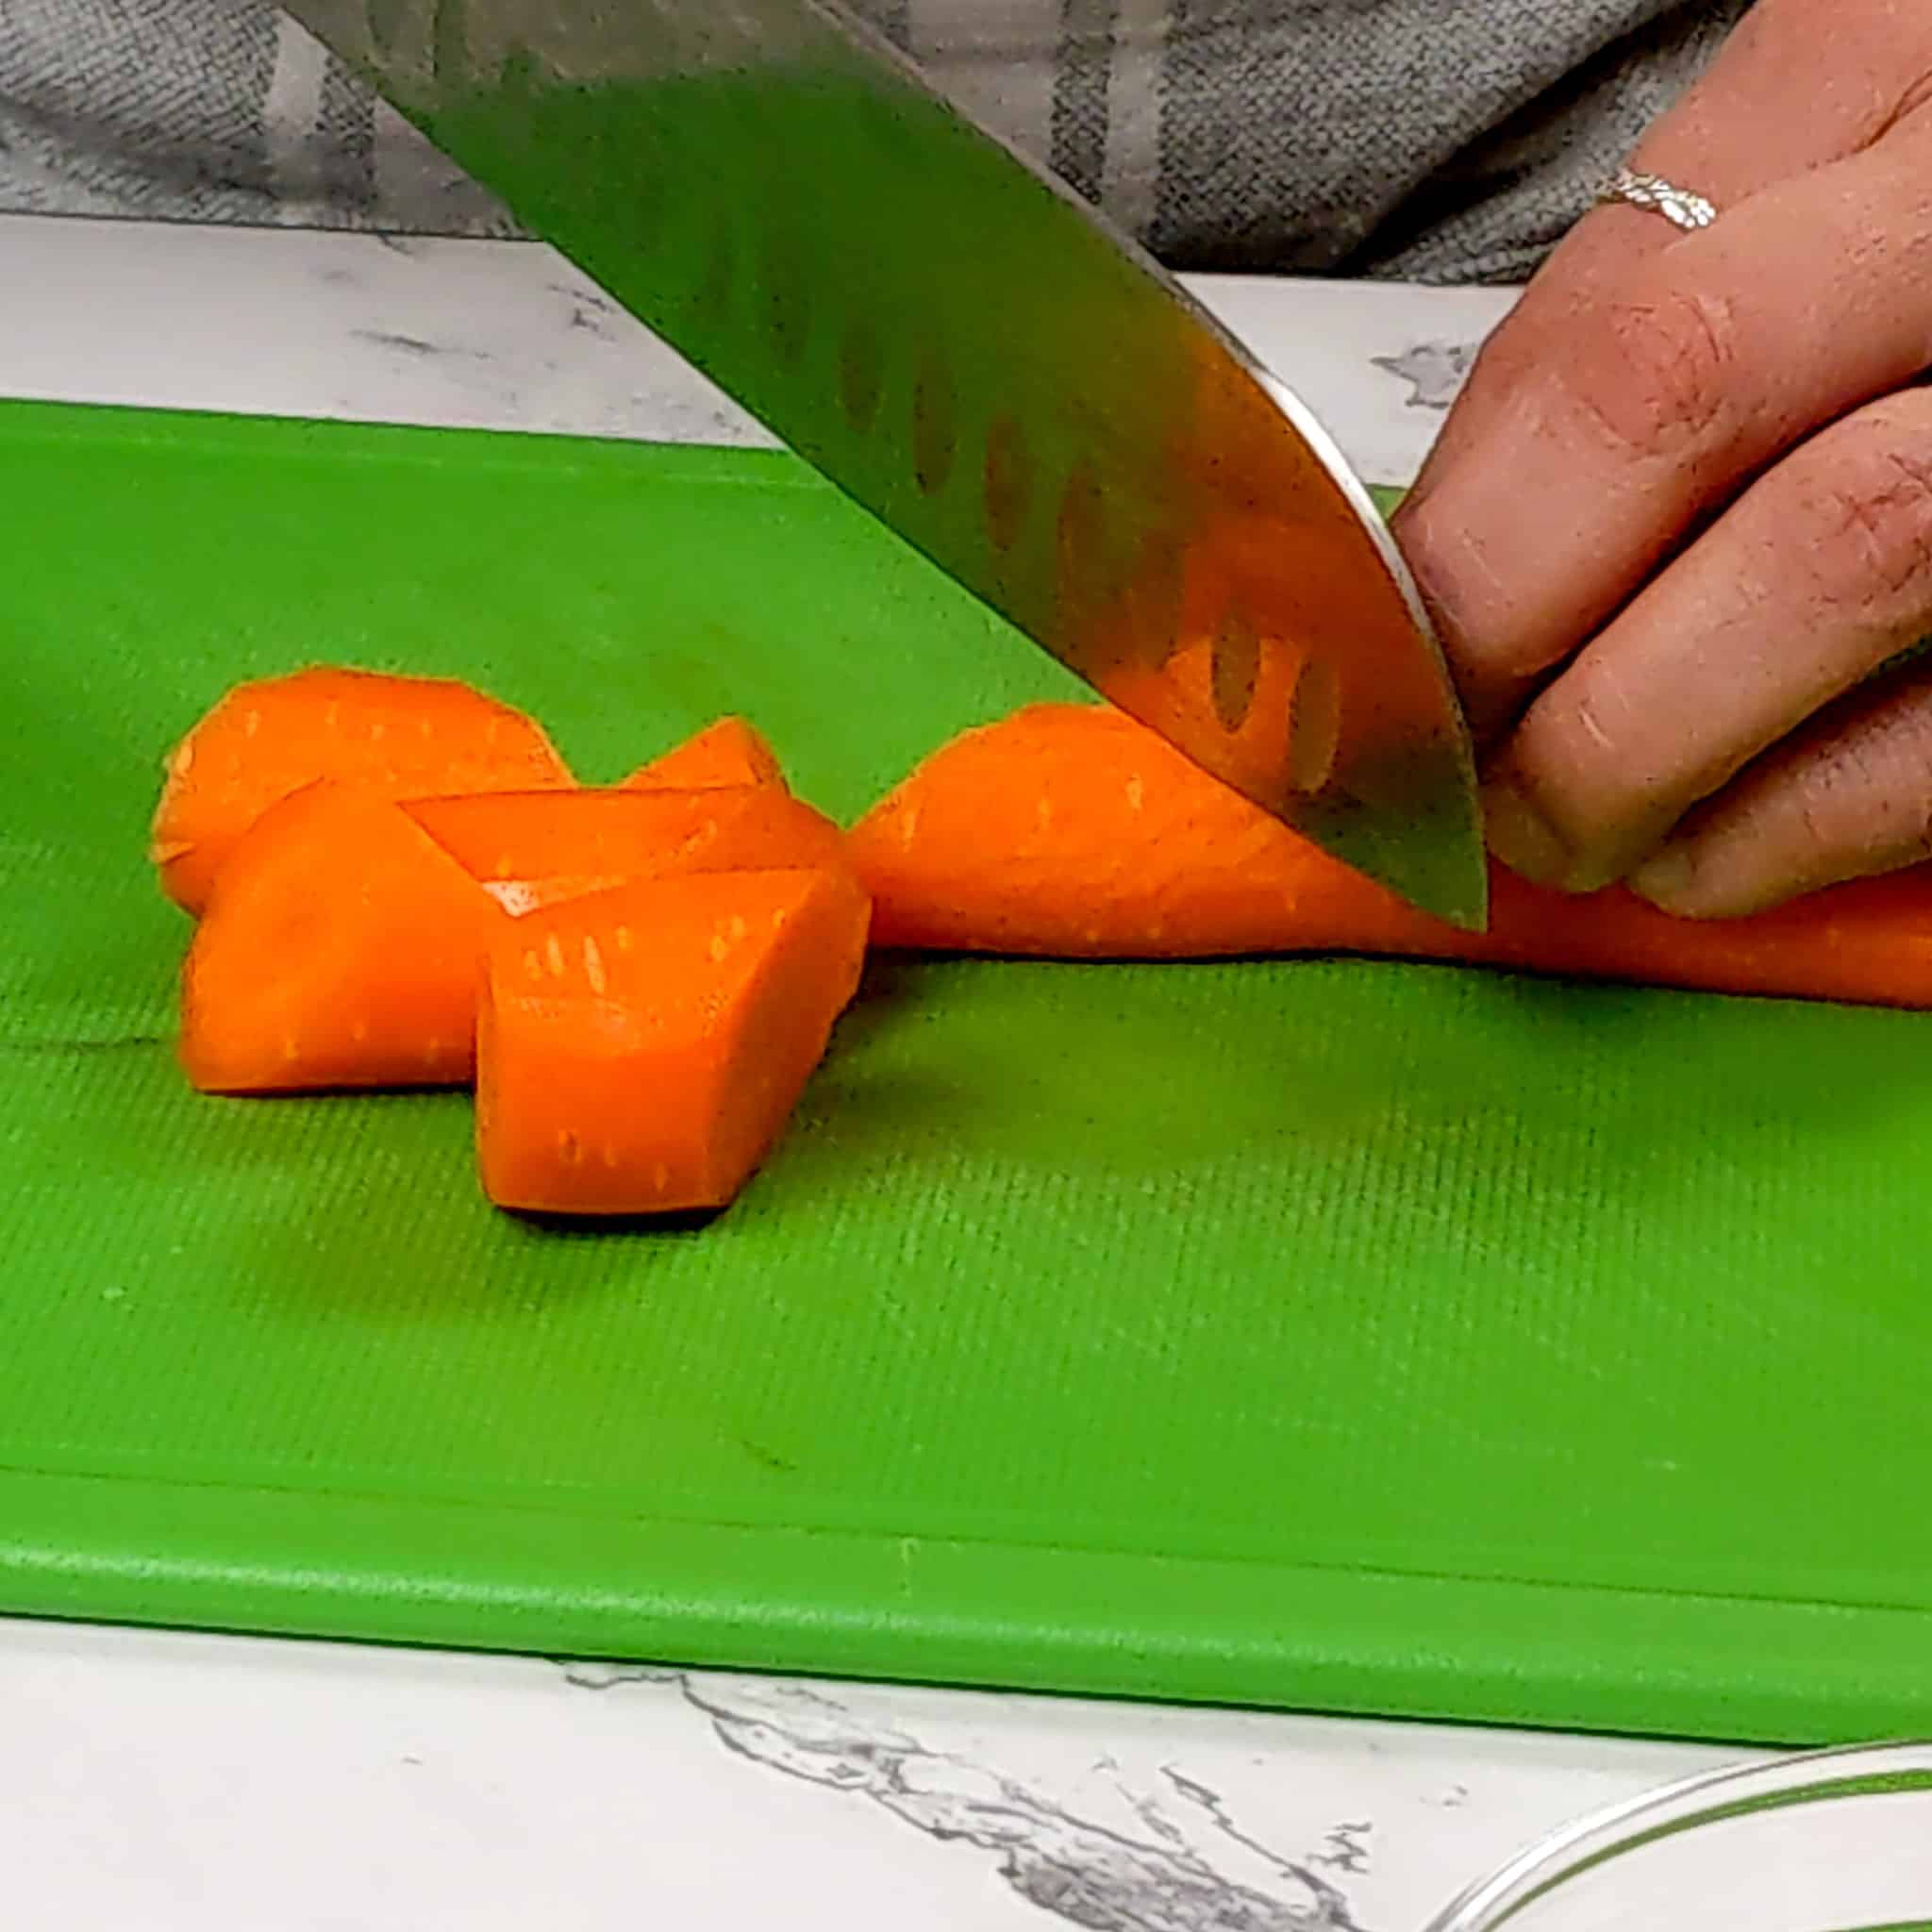 a carrot being cut into large slices on a diagonal